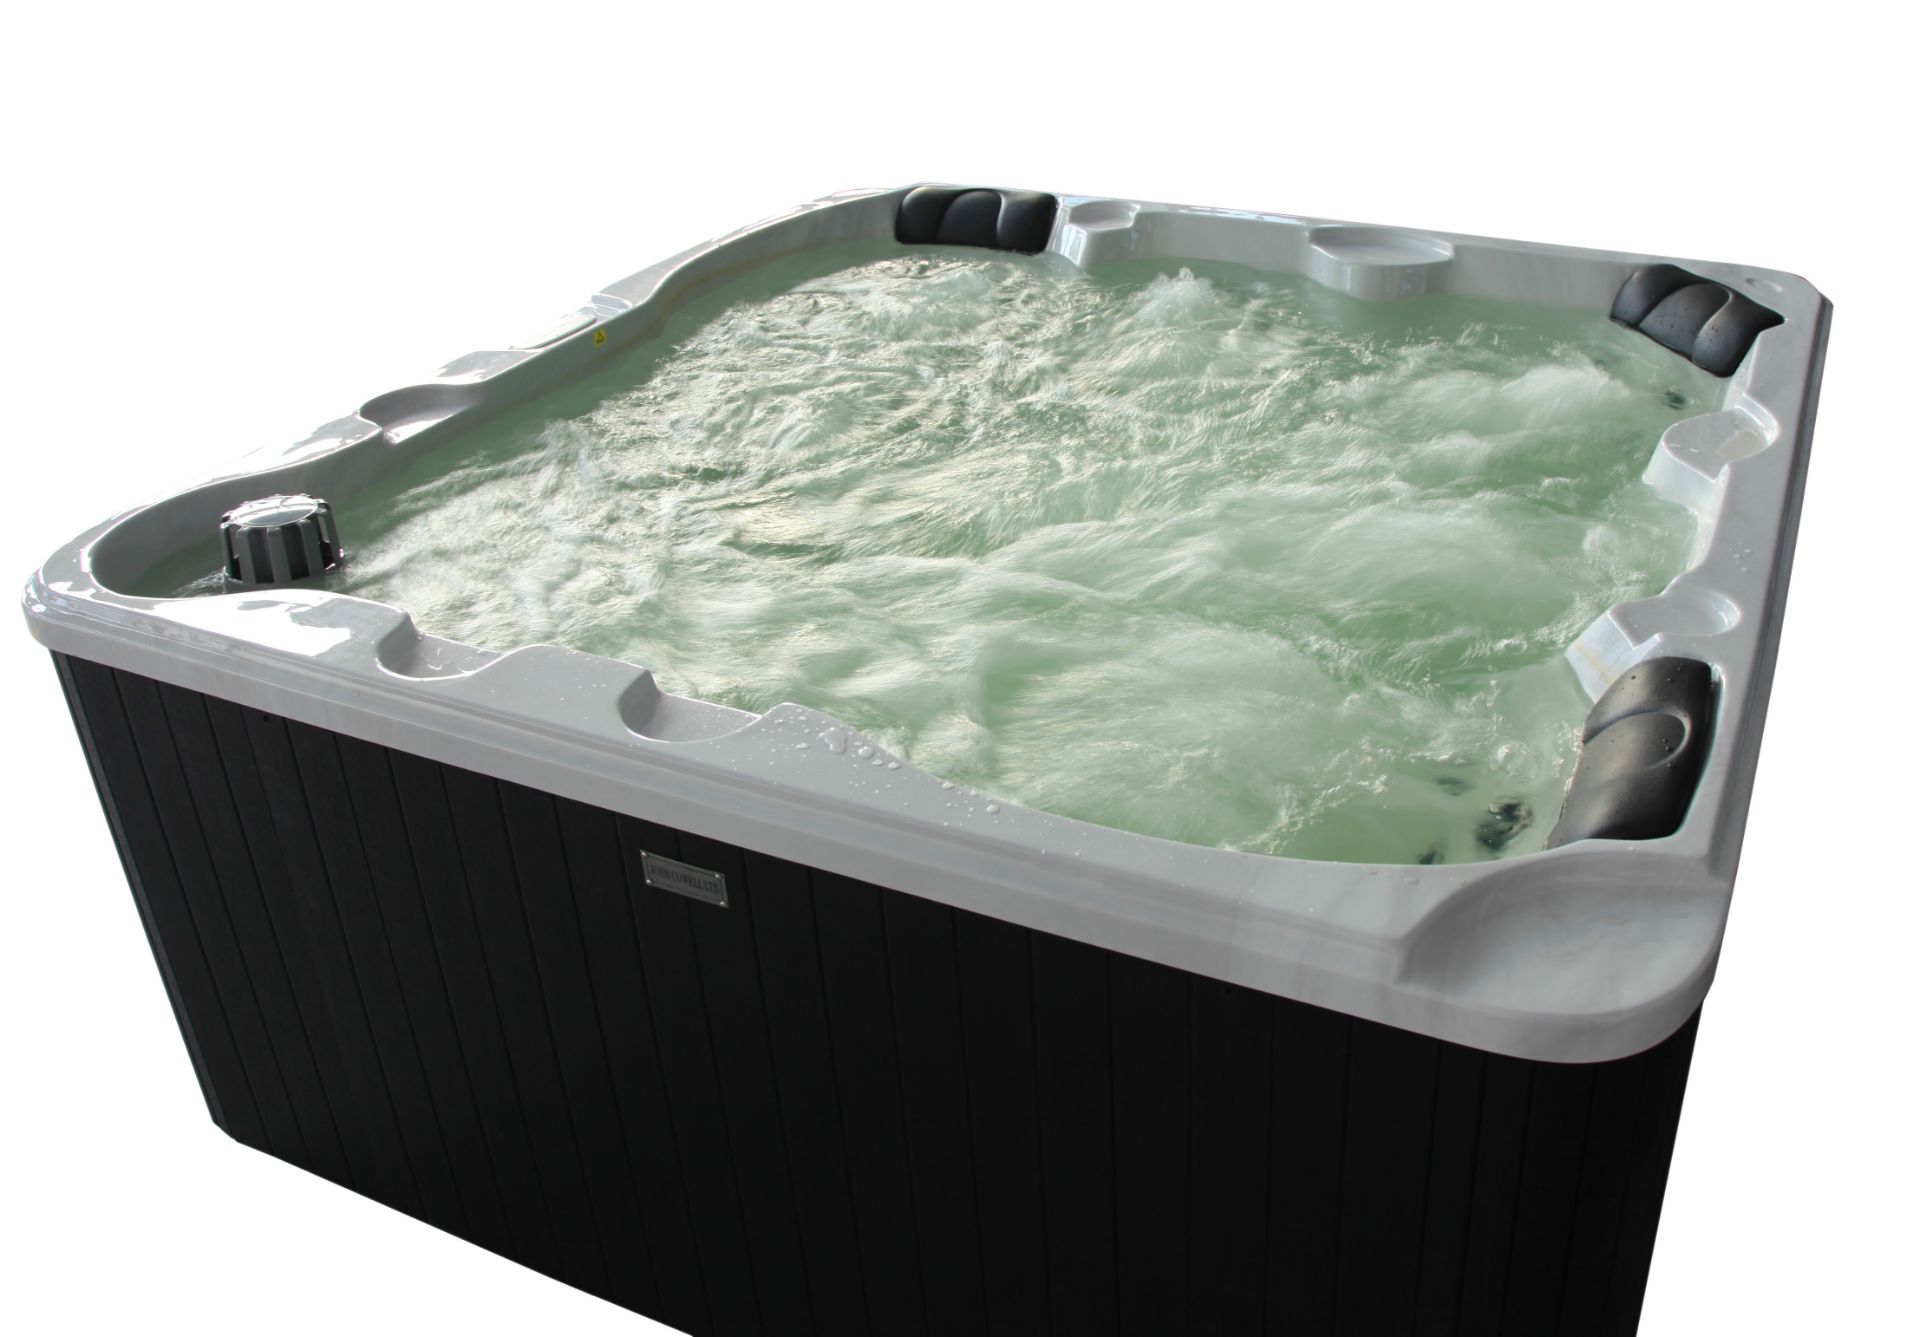 HIGH QUALITY NEW PACKAGED 2015 HOT TUB, MATCHING STEPS, SIDE, INSULATING COVER, TOP USA RUNNING GEAR - Image 2 of 3